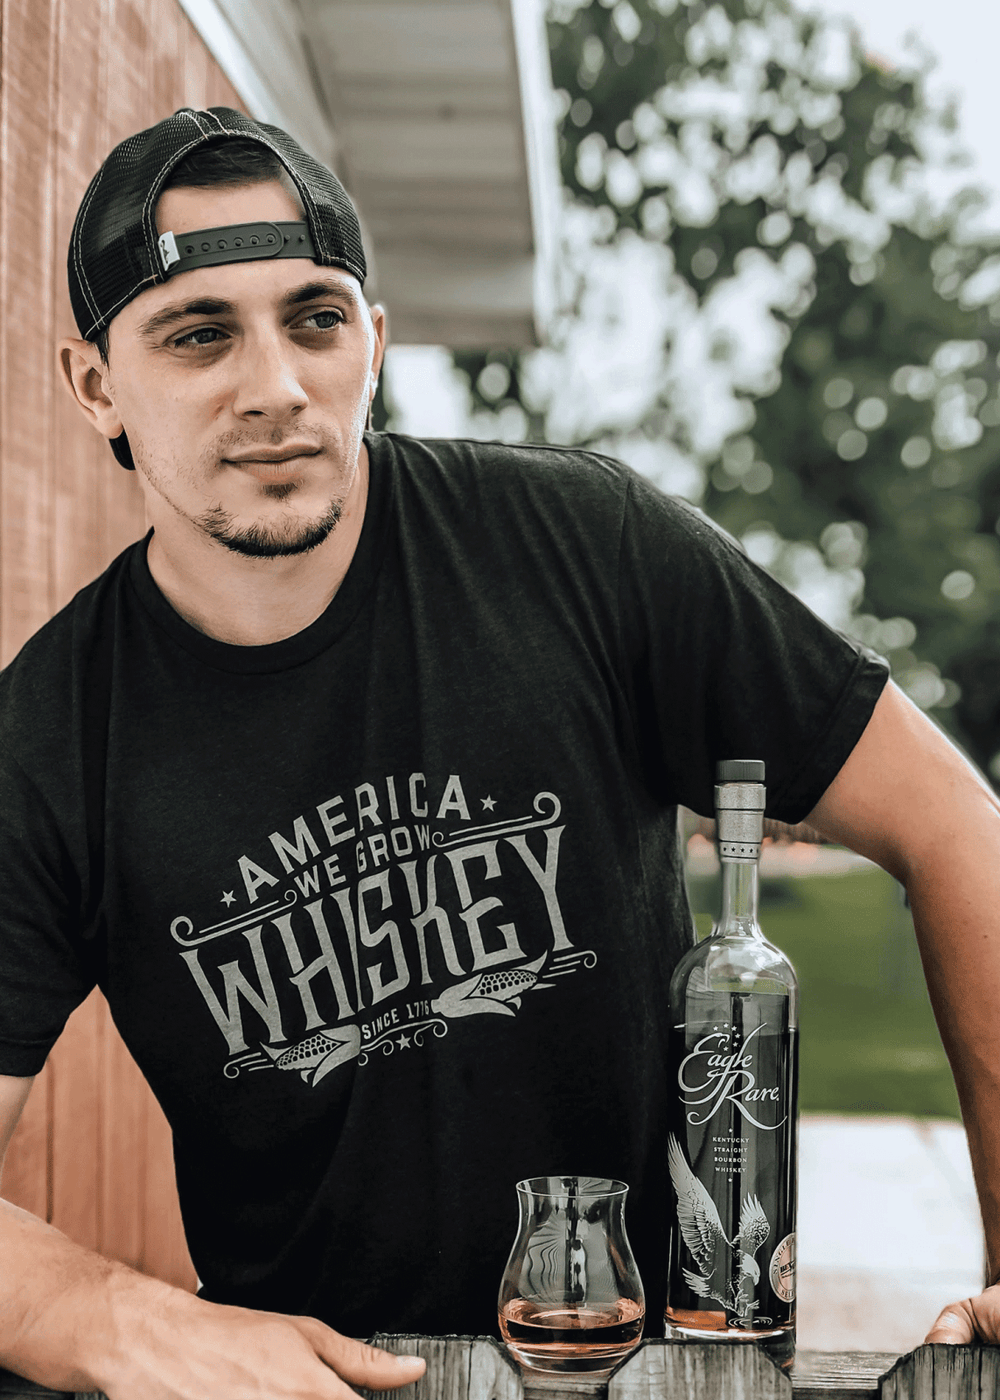 A man wearing a Rural Cloth "America We Grow Whiskey Tee" with "America Powered By Whiskey" printed on it is standing outdoors by a wooden surface. Next to him on the surface are a bottle of whiskey and a glass partially filled with whiskey.